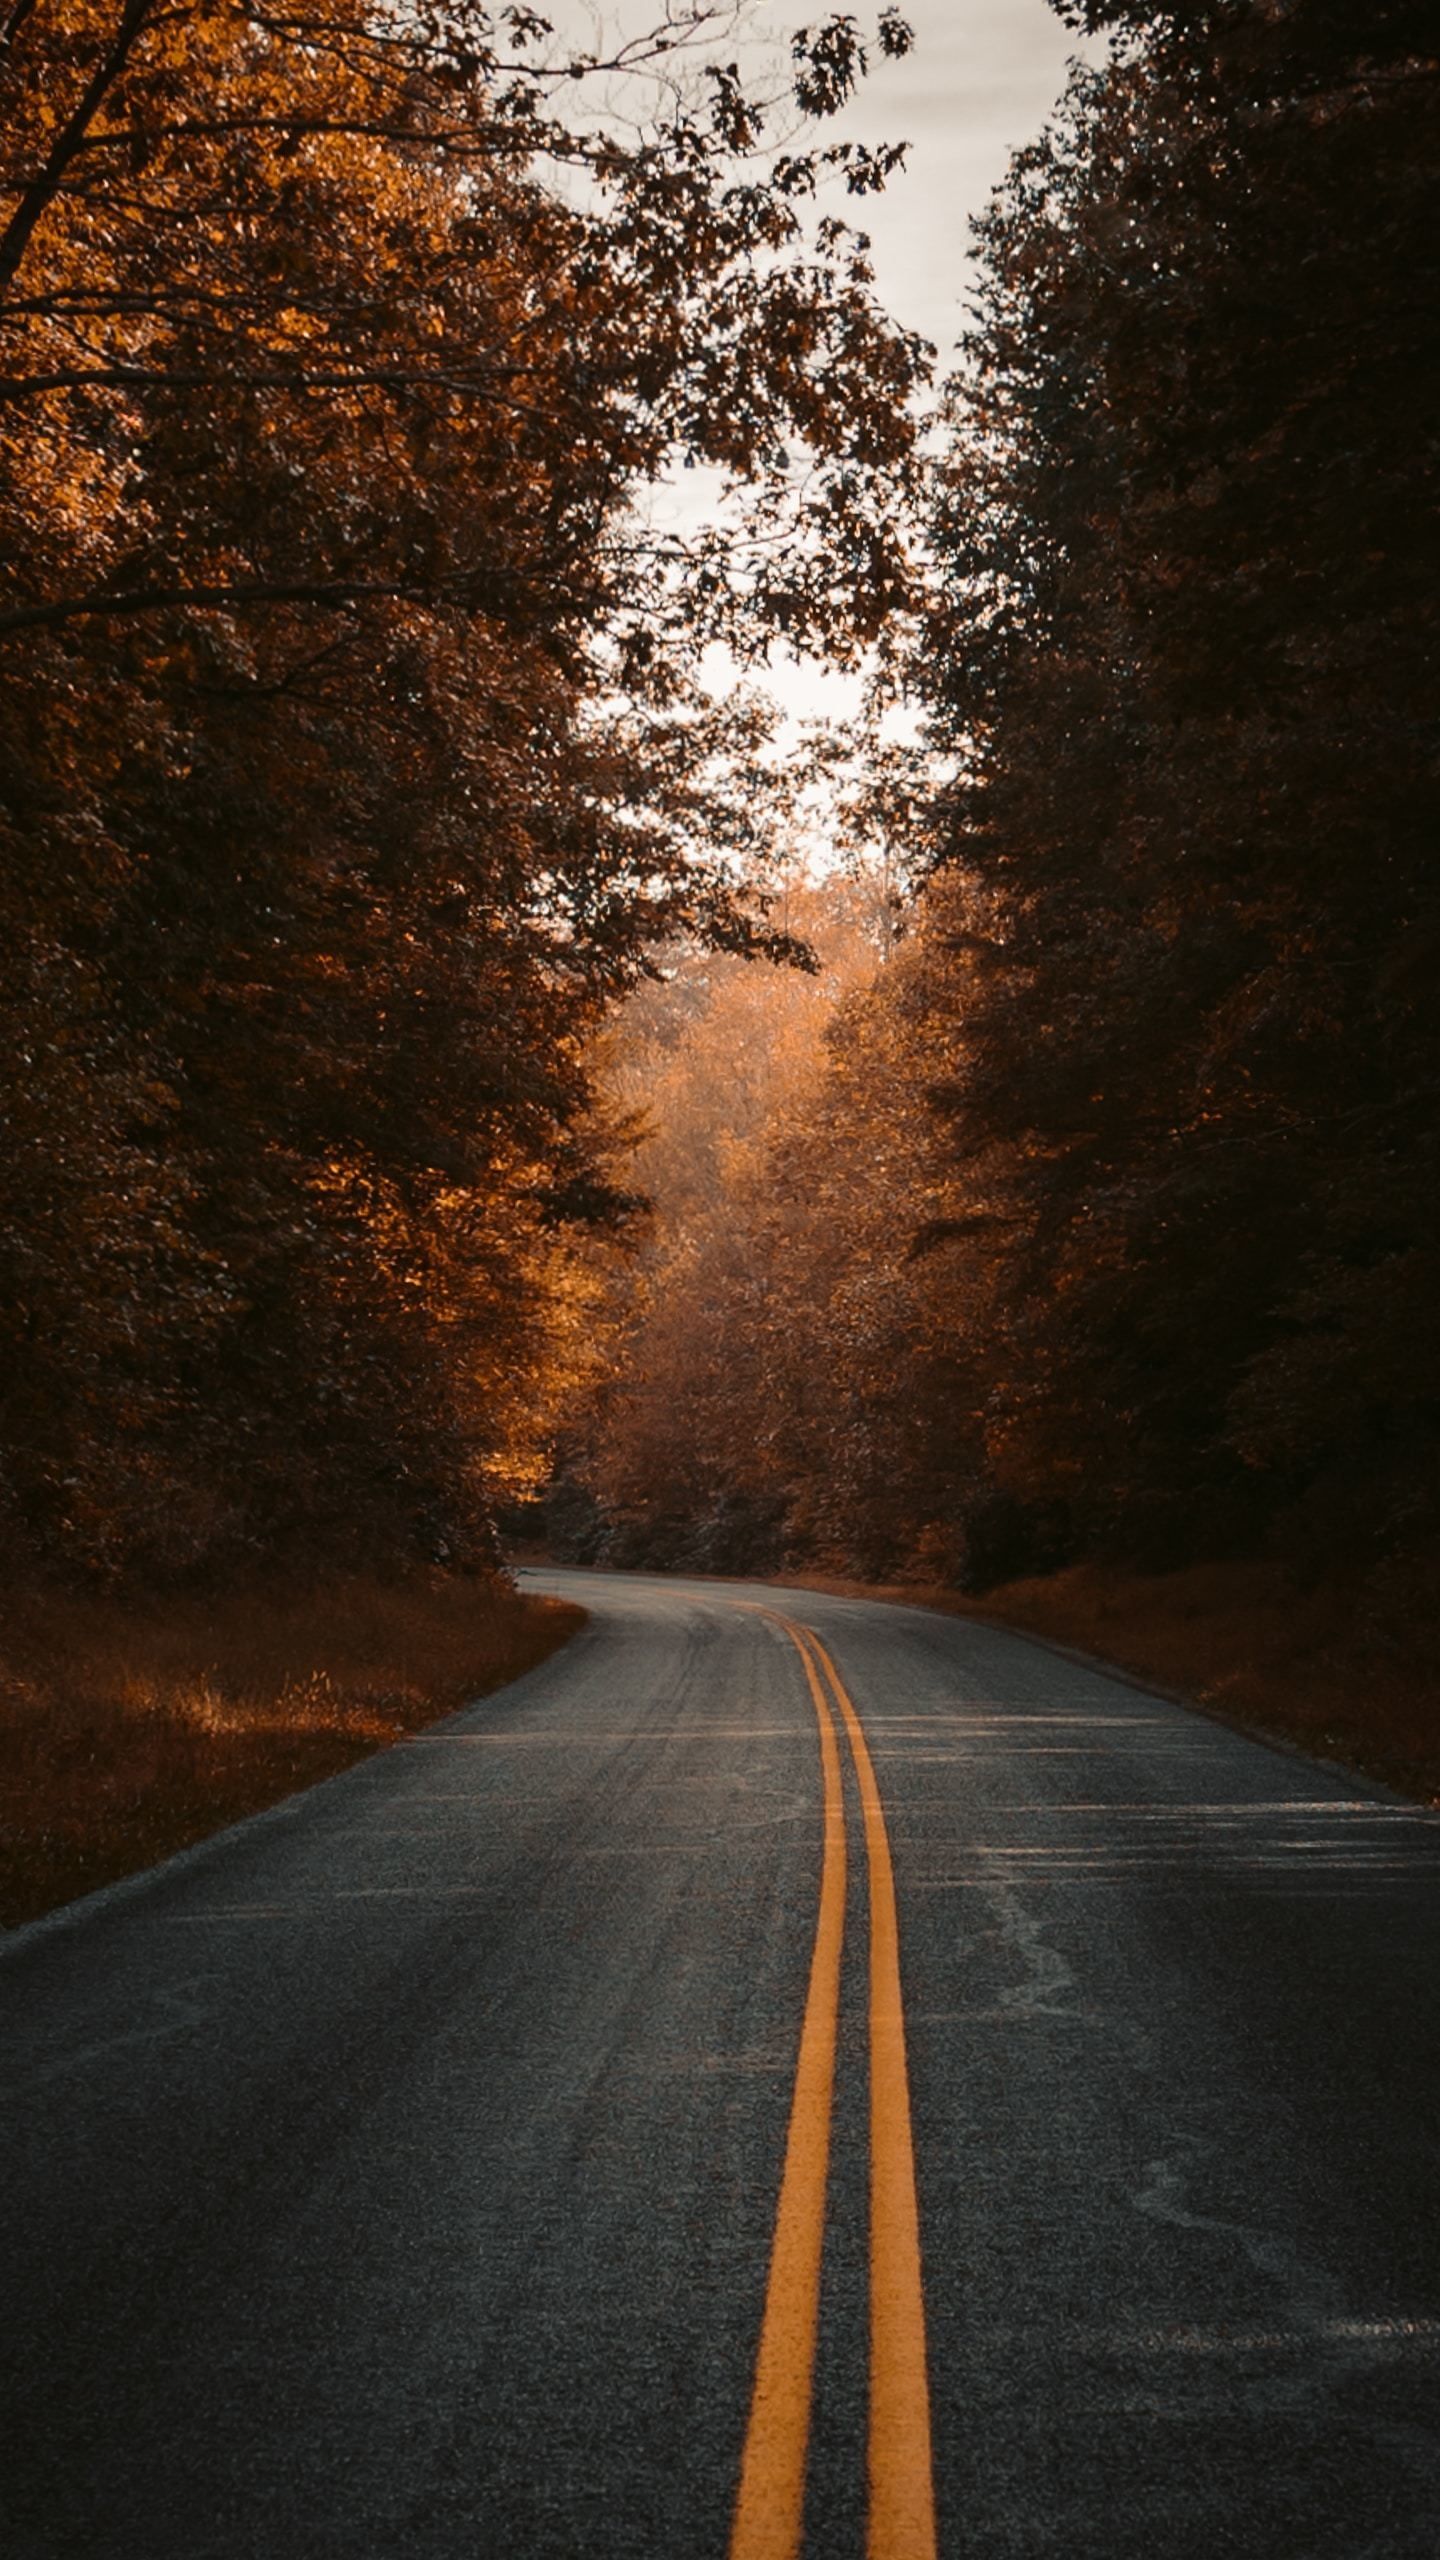 Fall, road, highway wallpaper. Nature photography, Fall photography nature, Fall wallpaper